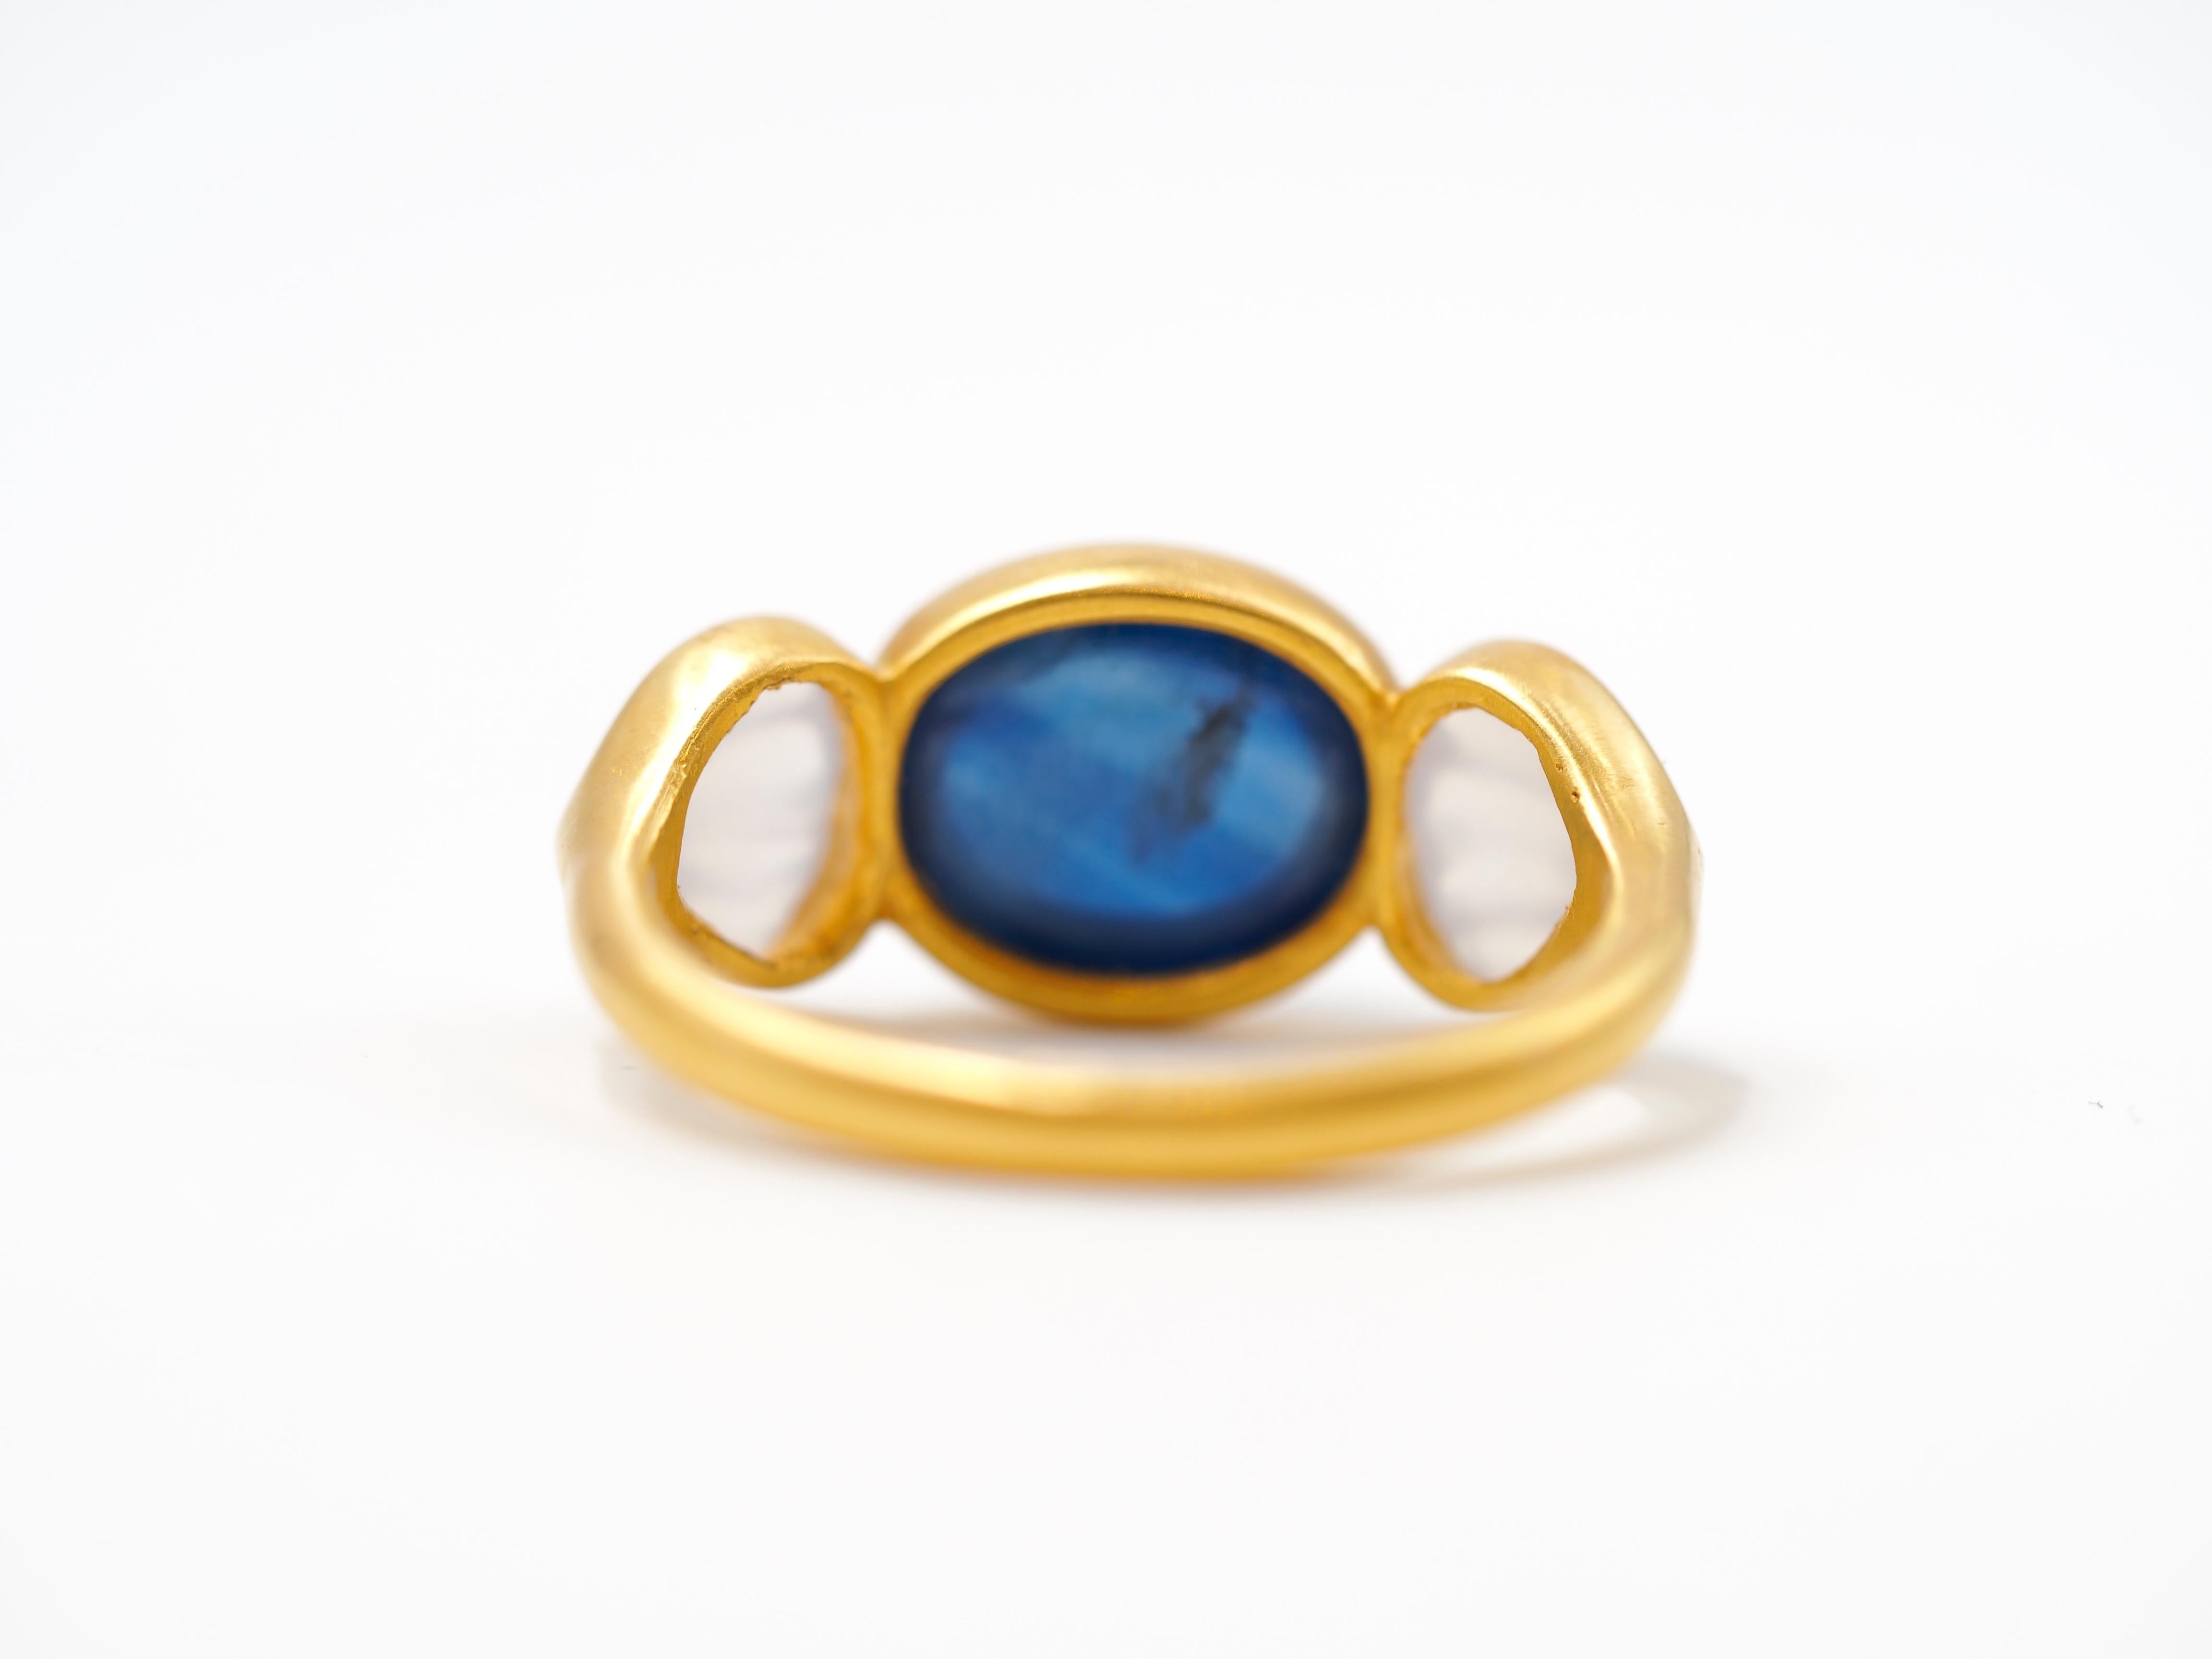 Scrives 7.58 carat Blue Sapphire Cabochon White Chalcedony 22 Karat Gold Ring For Sale 3